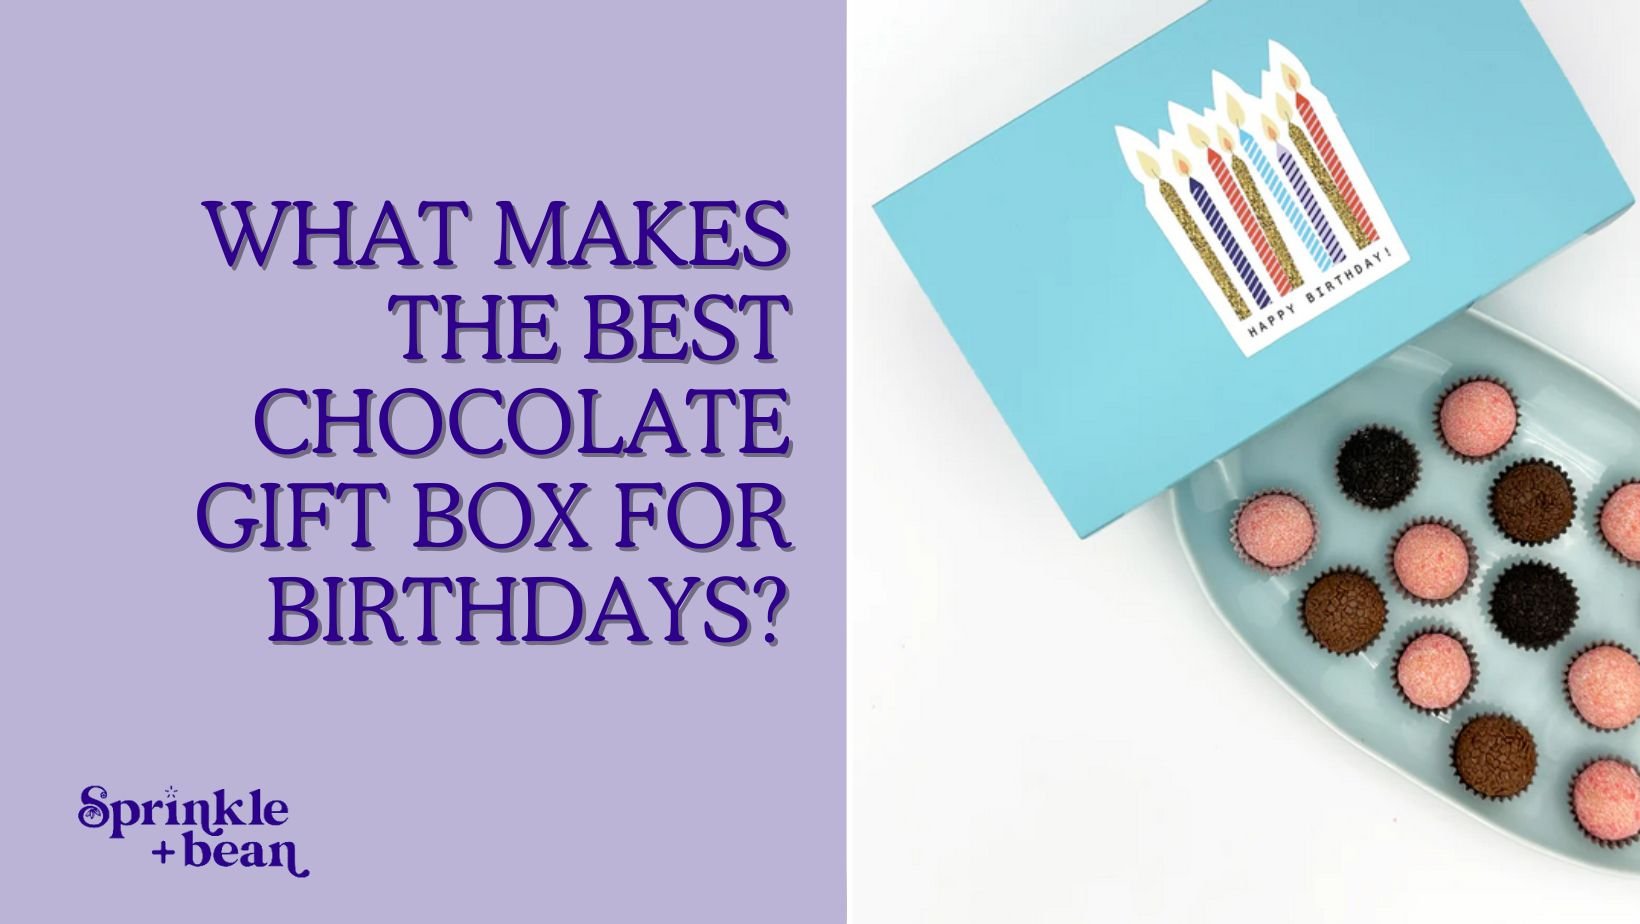 The Best Chocolate Gift Box Idea For a Birthday